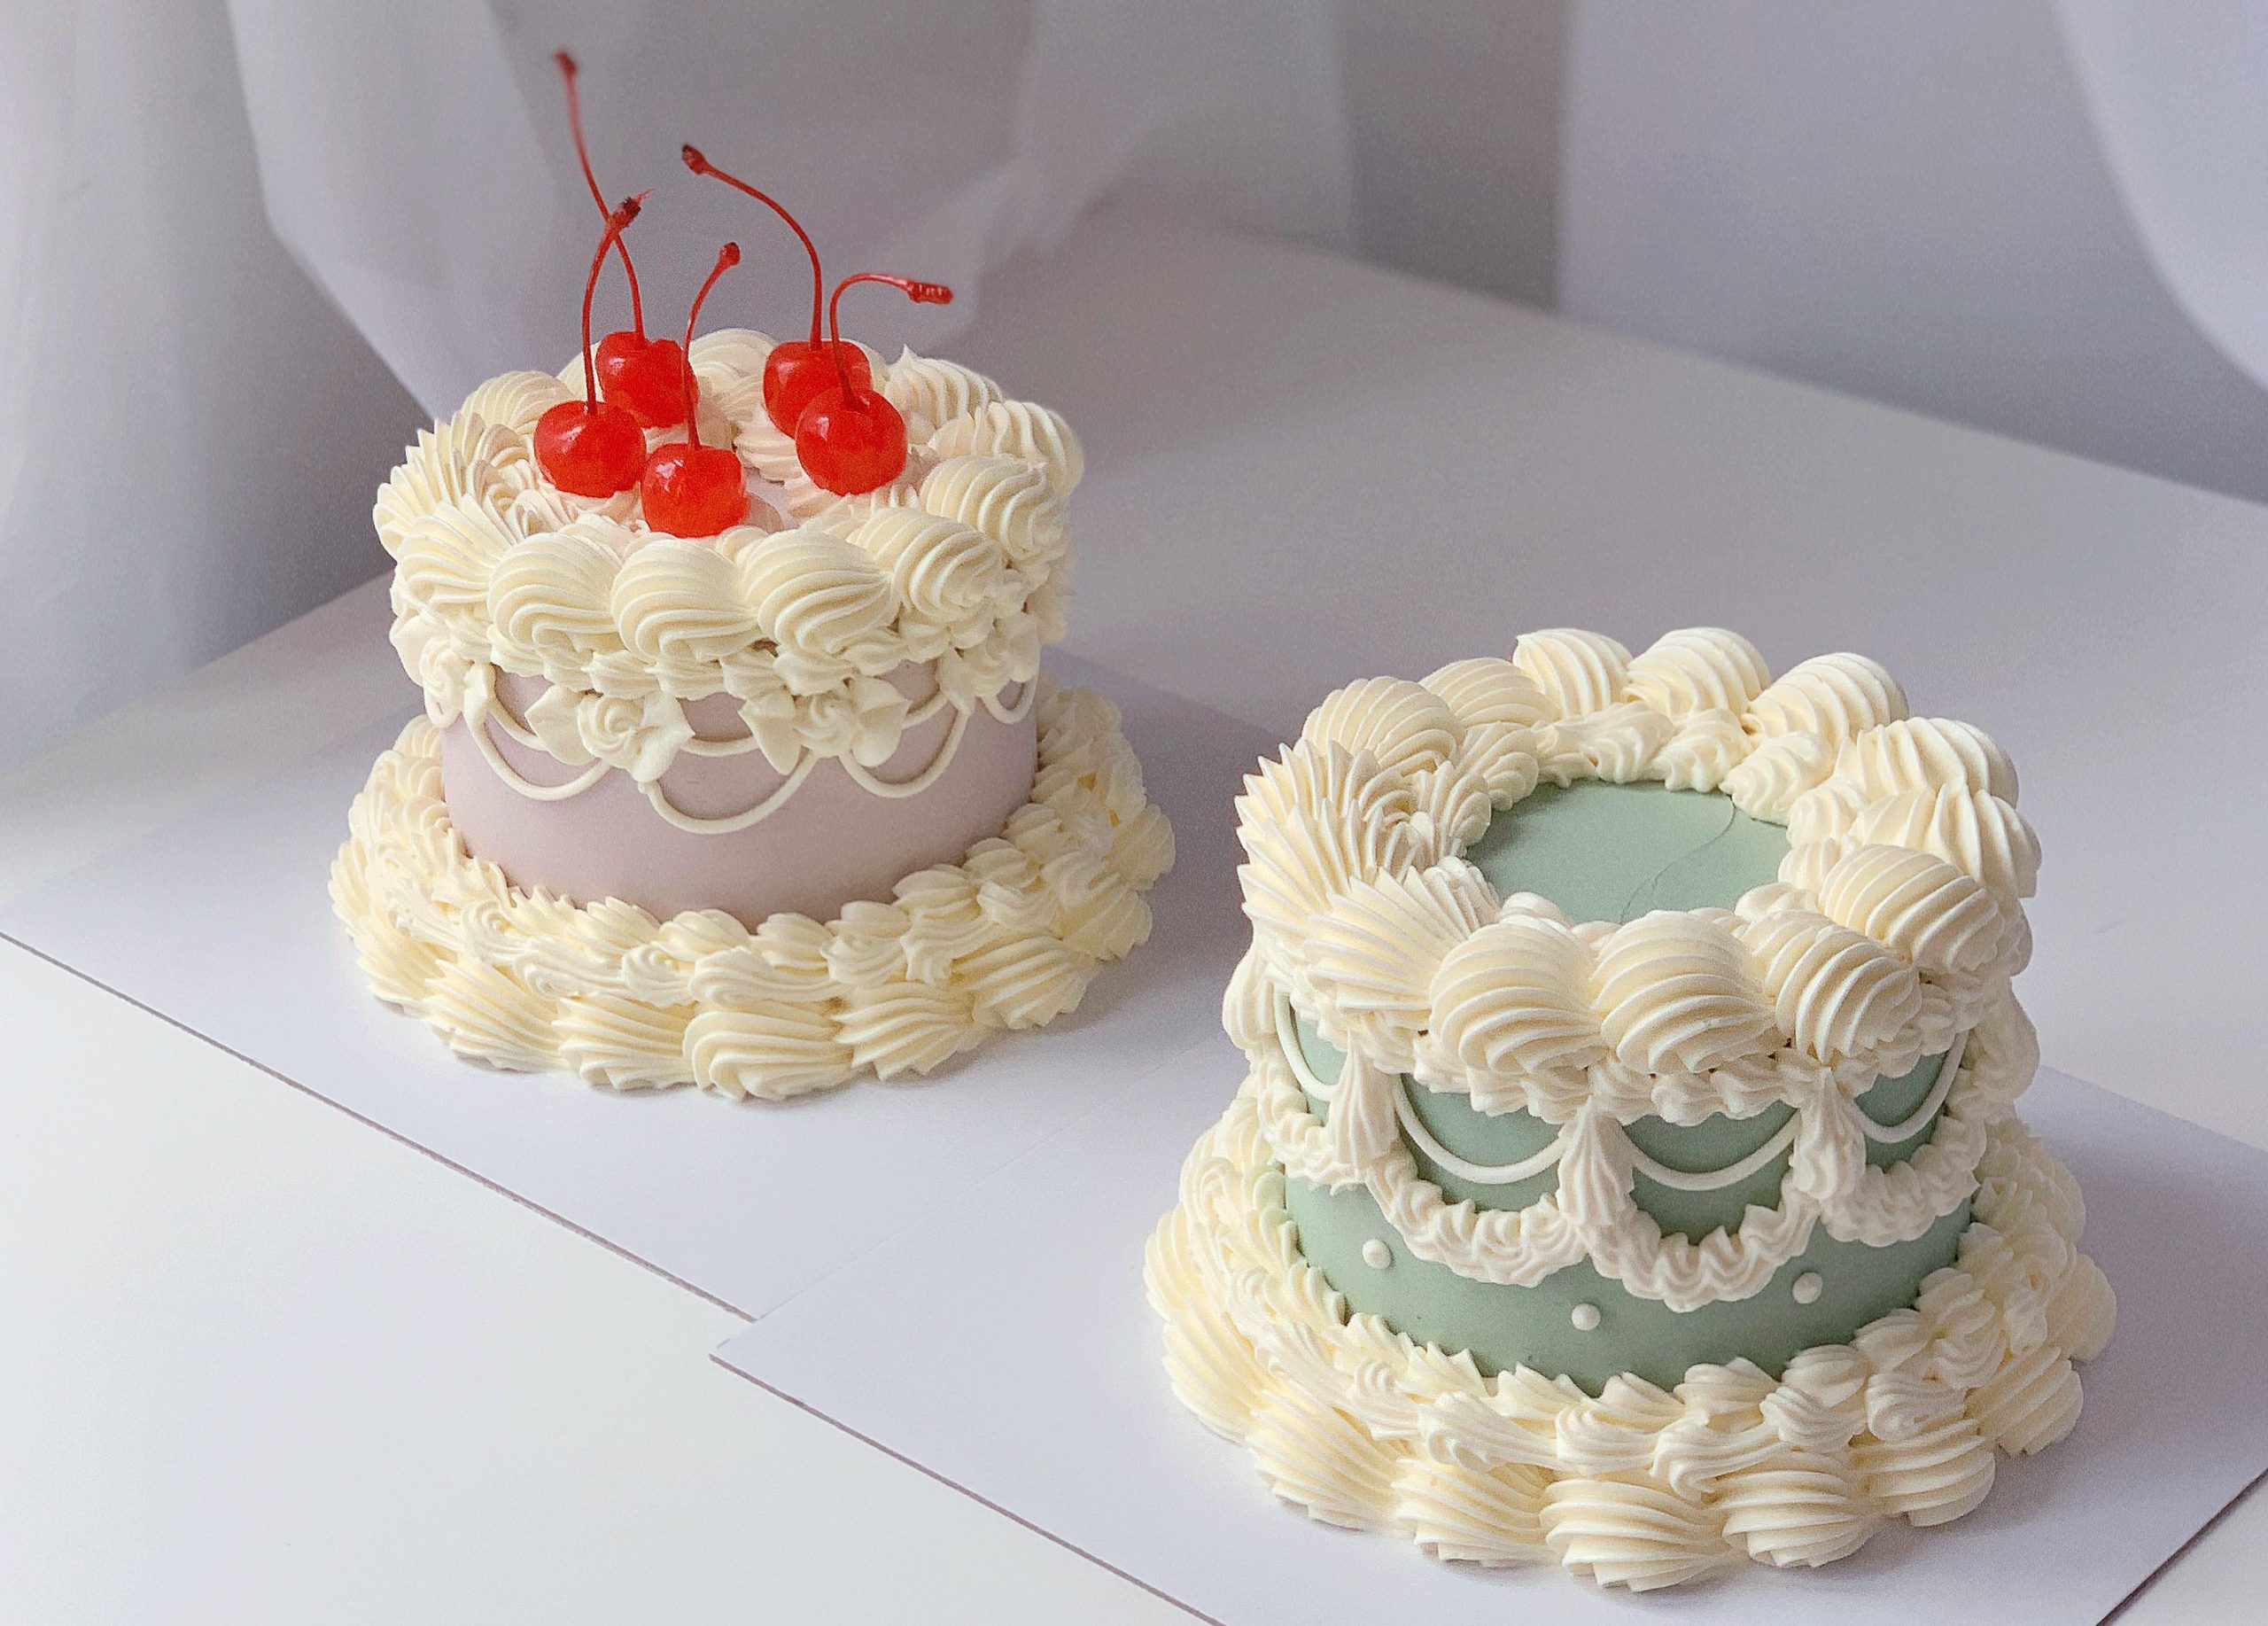 Discover more than 63 cfc cakes and bakers latest - awesomeenglish.edu.vn